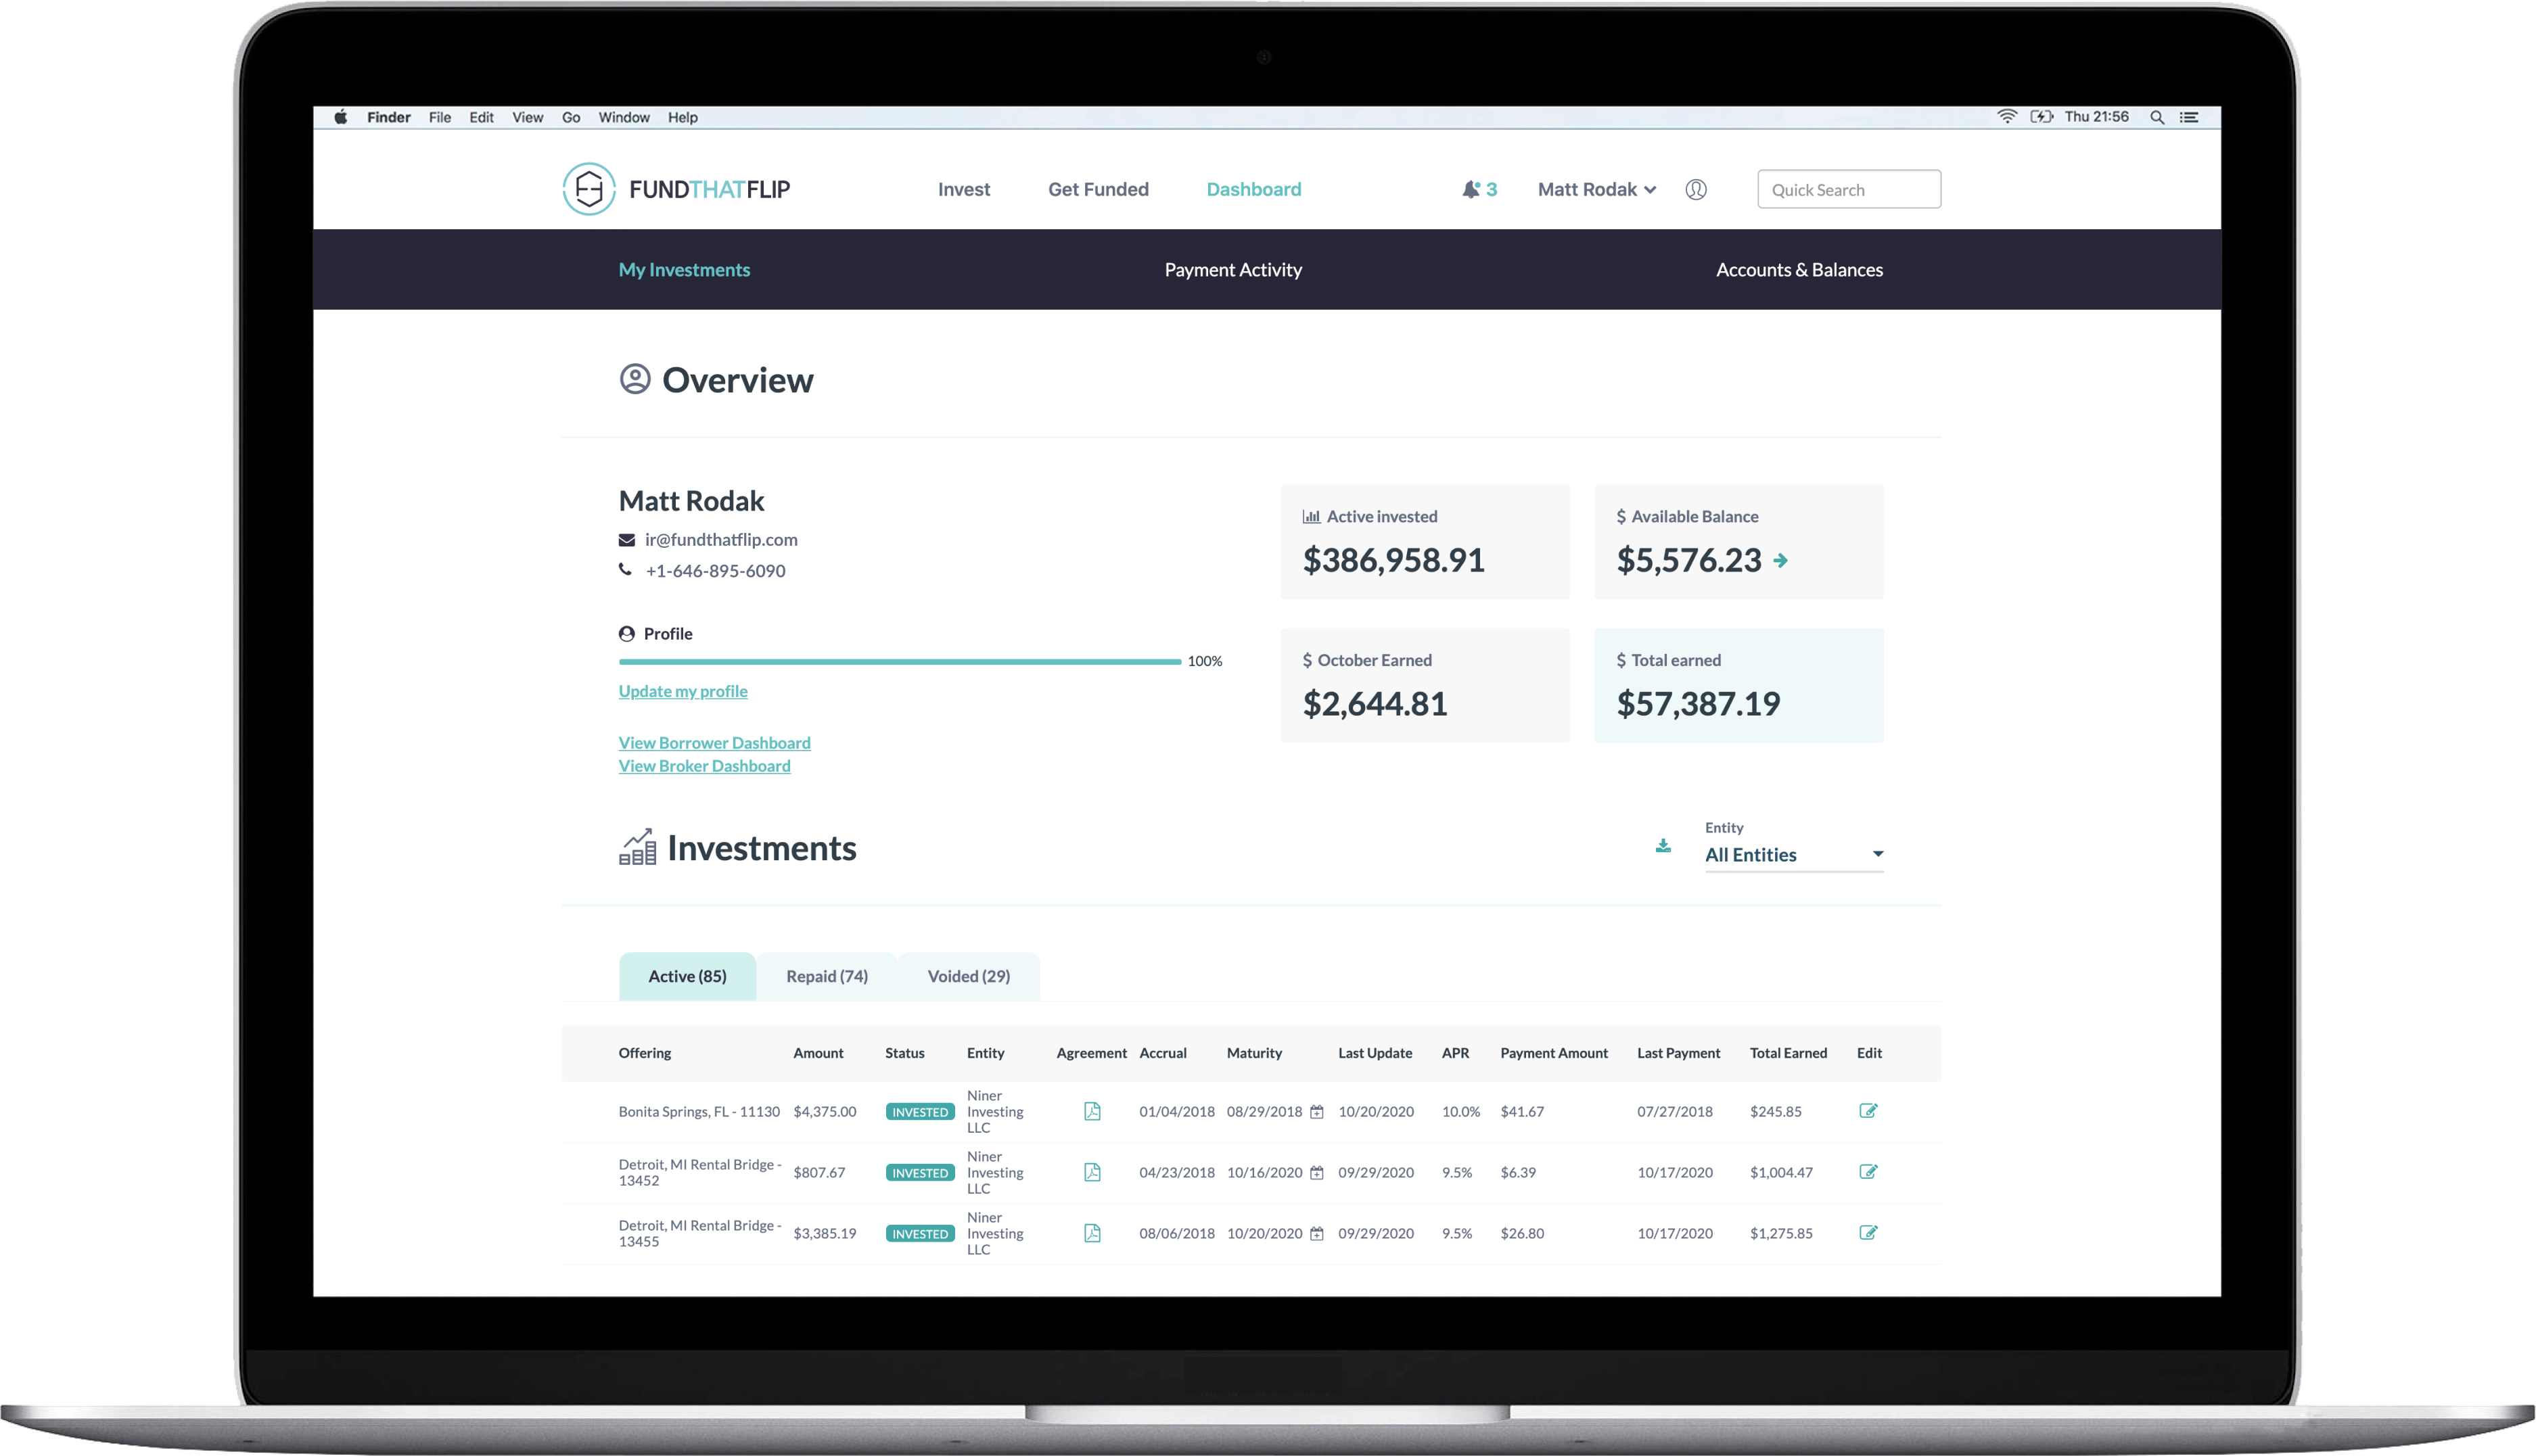 Fund That Flip's investor dashboard makes it easy to track and manage investments.